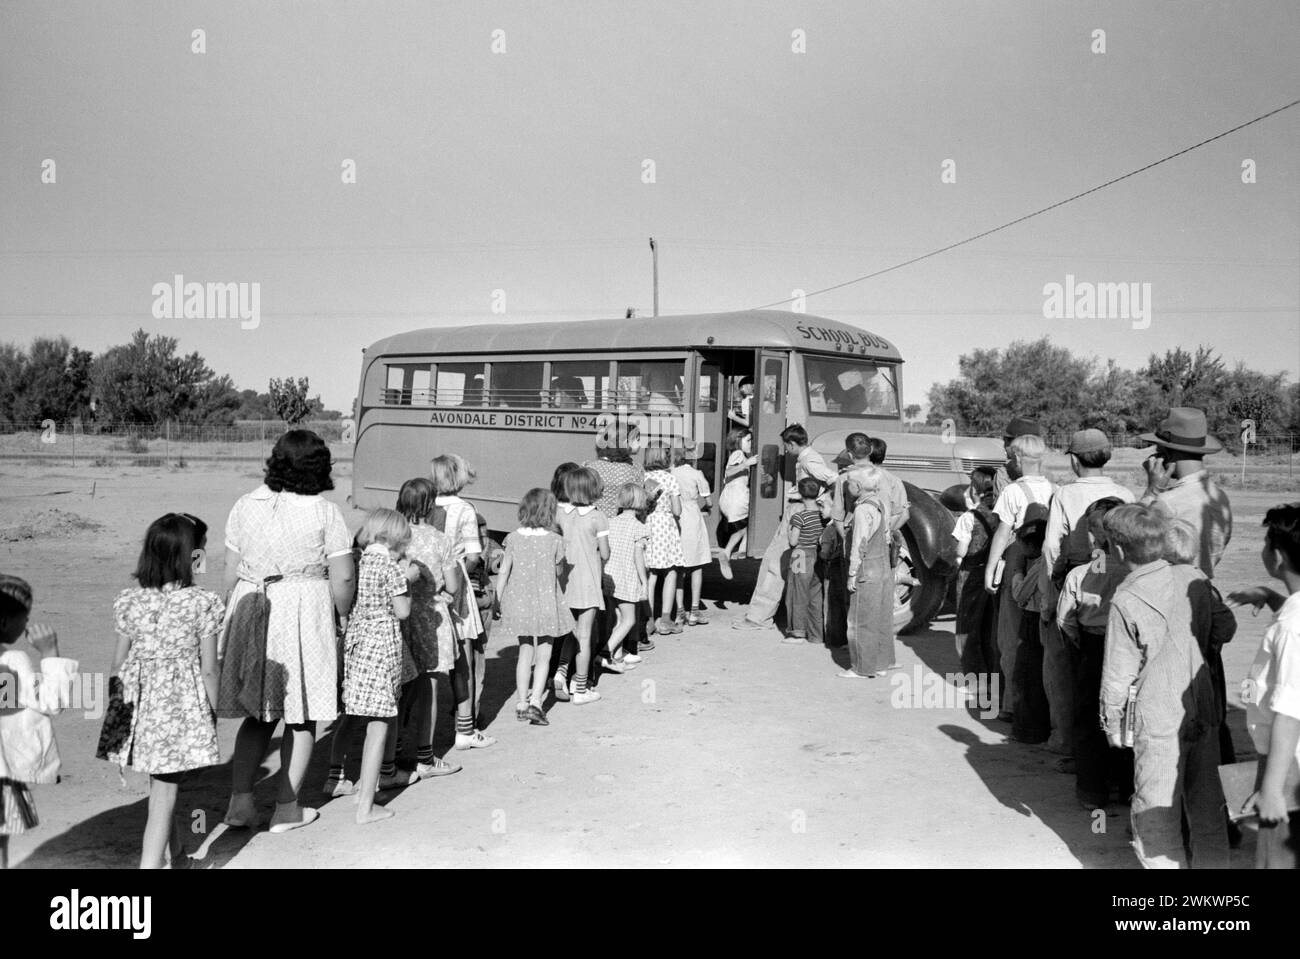 Children of migratory laborers who are living at migratory labor camp boarding school bus, Agua Fria, Arizona, USA, Russell Lee, U.S. Farm Security Administration, March 1940 Stock Photo